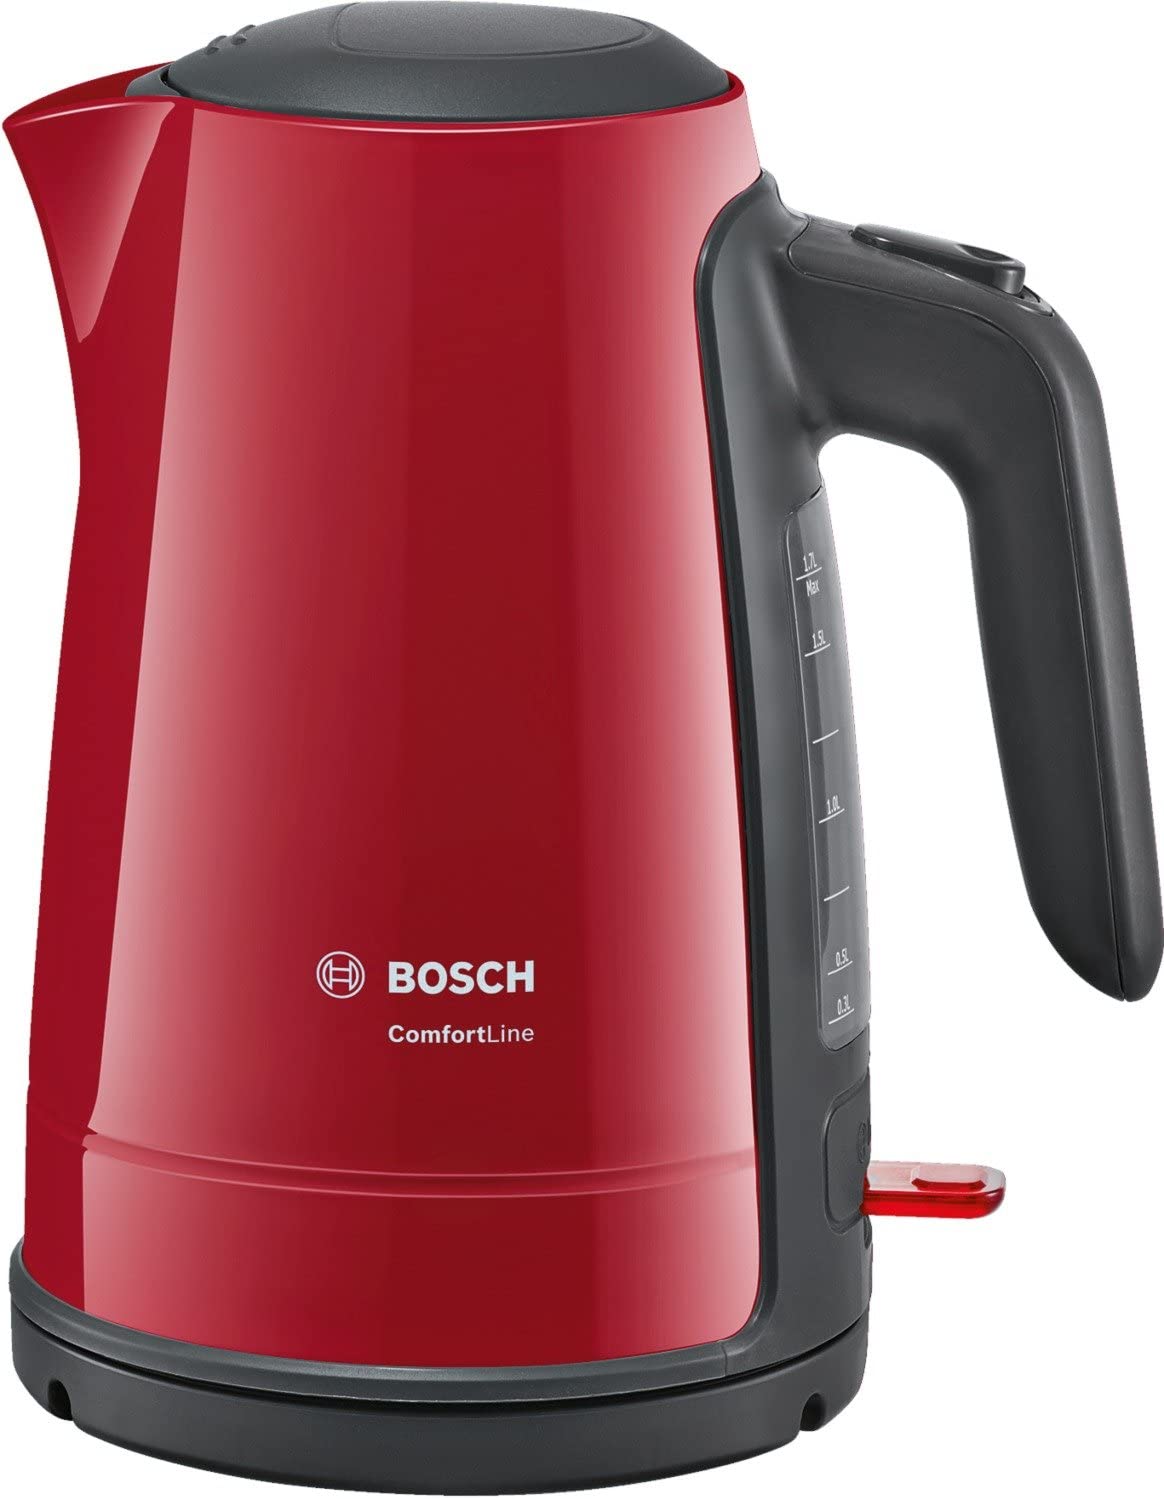 Bosch ComfortLine TWK6A014 Wireless Kettle, 1-Cup Function, Large Opening, Overheating Protection, Removable Limescale Filter, 1.7 L, 2400 W, Red